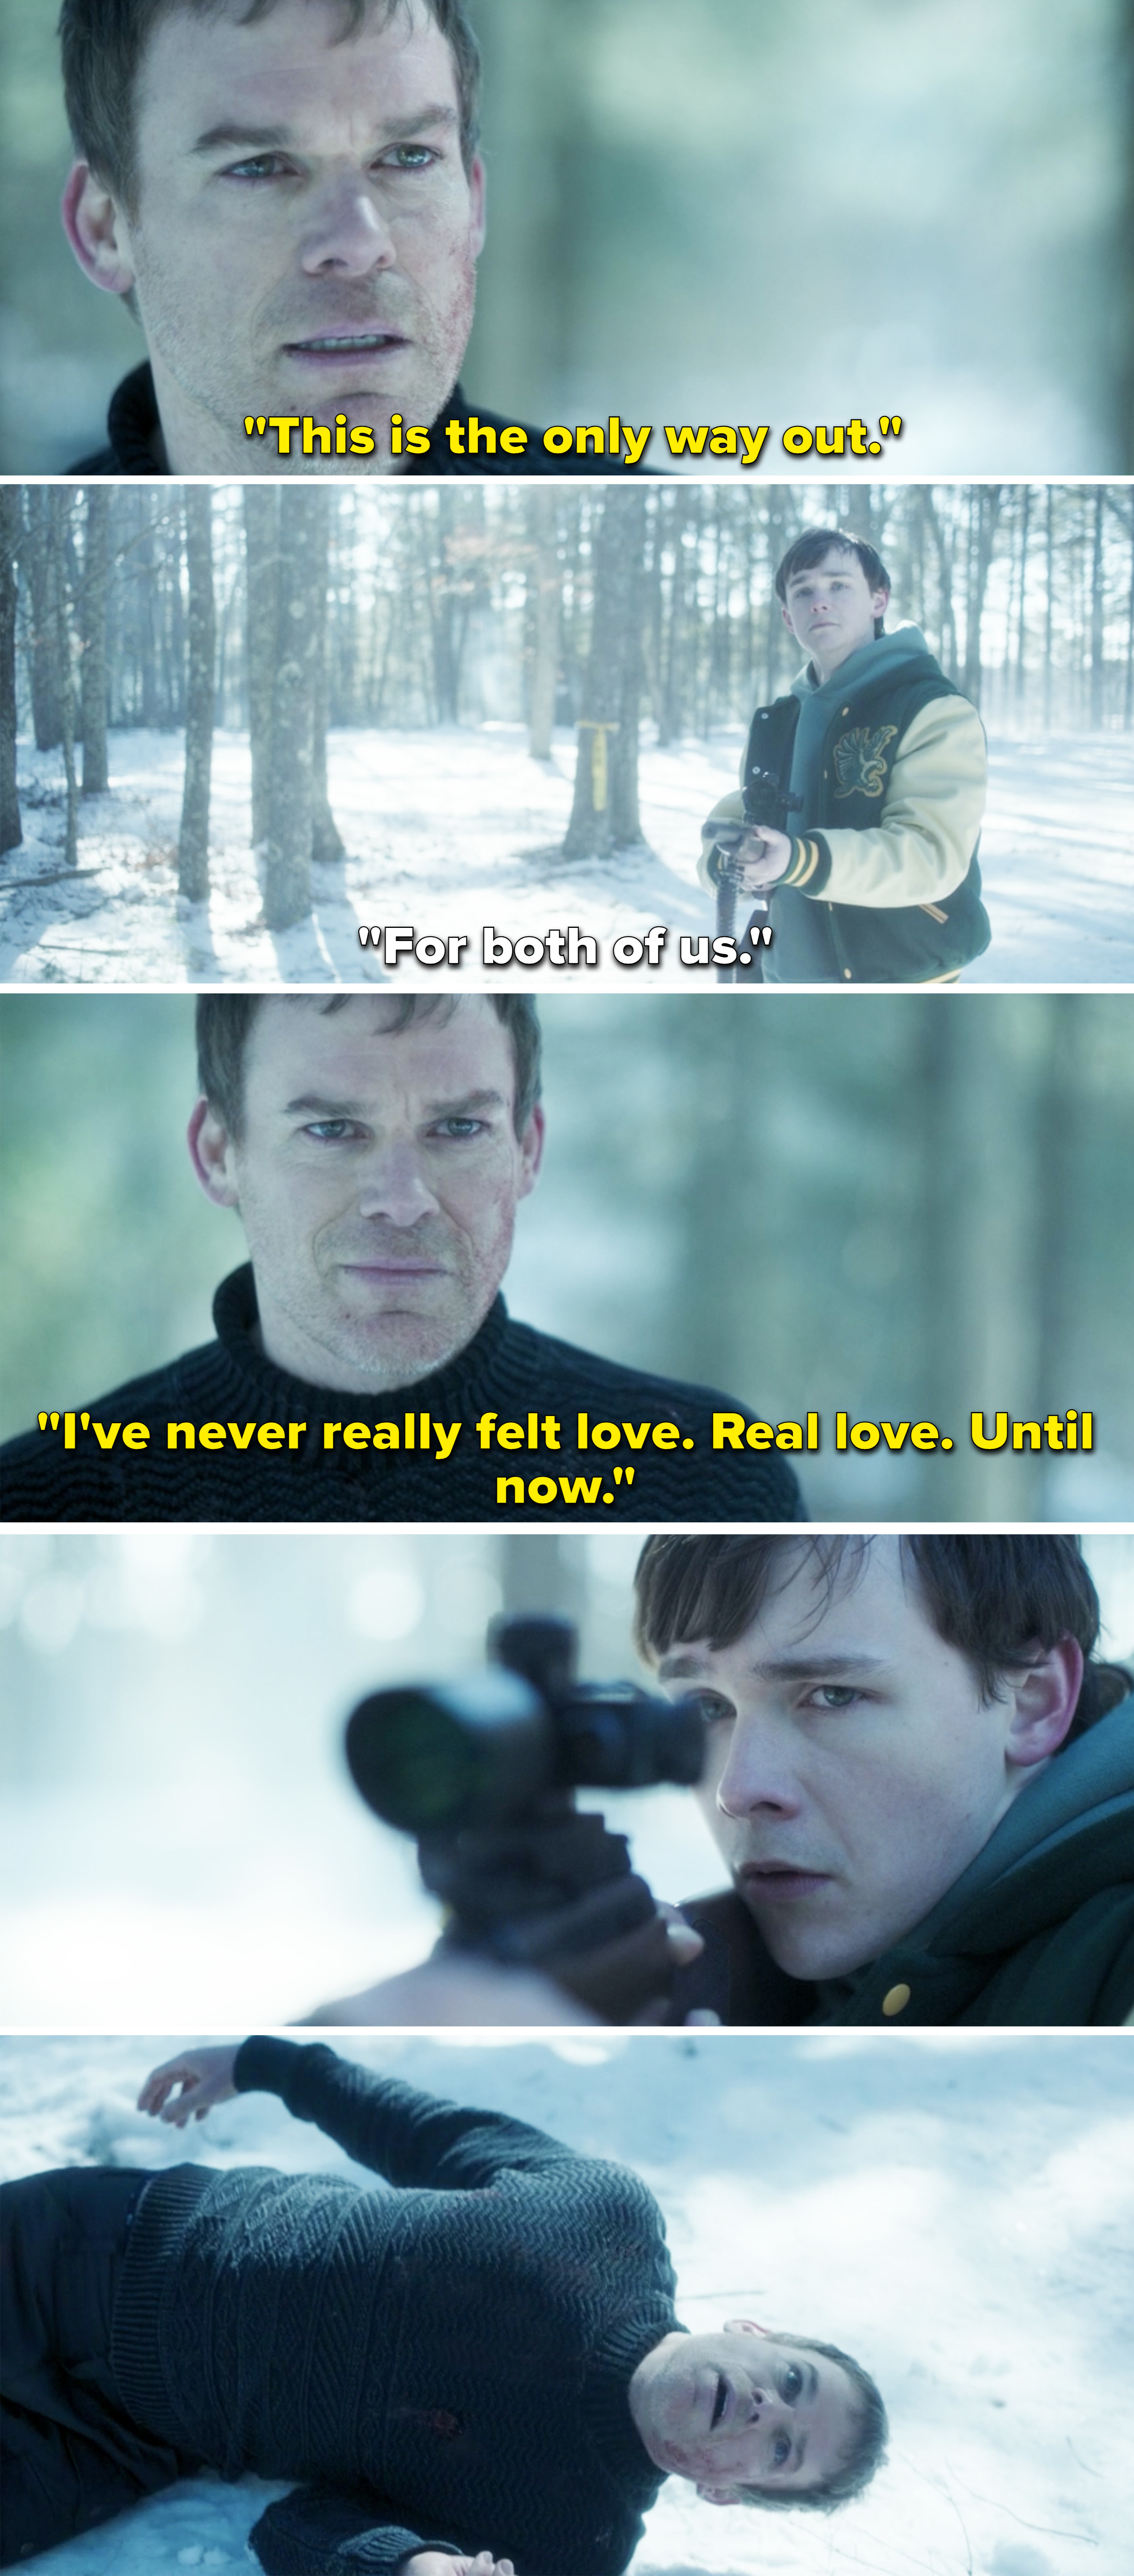 Dexter saying he never felt love until this moment with Harrison pointing a gun at him